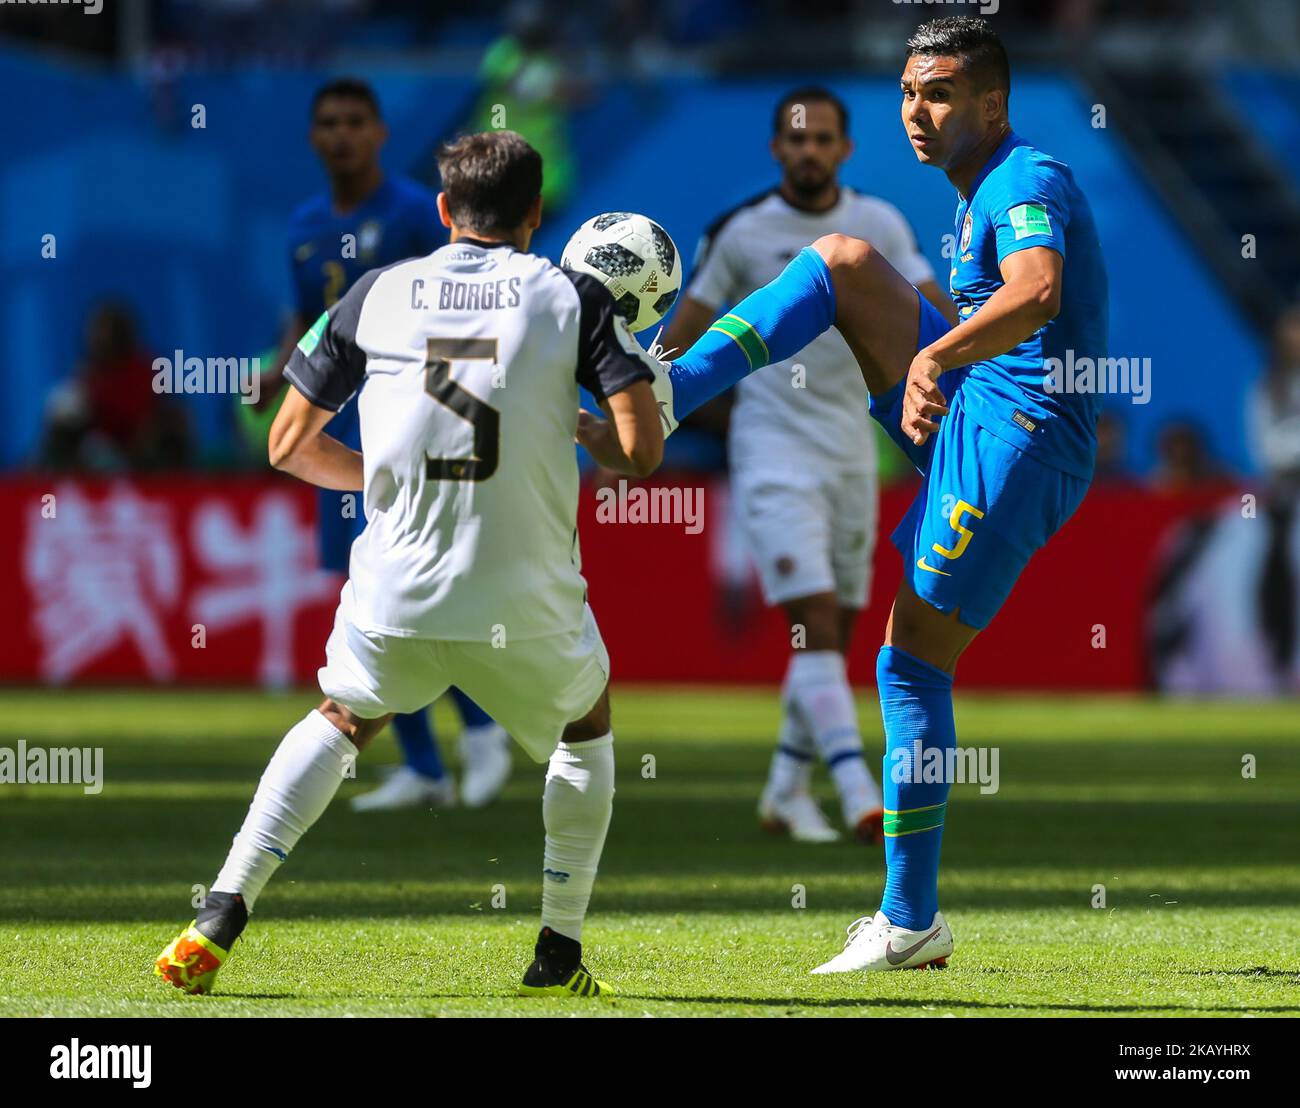 Celso Borges (L) of the Costa Rica national football team and Casemiro of the Brazil national football team vie for the ball during the 2018 FIFA World Cup match, first stage - Group E between Brazil and Costa Rica at Saint Petersburg Stadium on June 22, 2018 in St. Petersburg, Russia. (Photo by Igor Russak/NurPhoto) Stock Photo